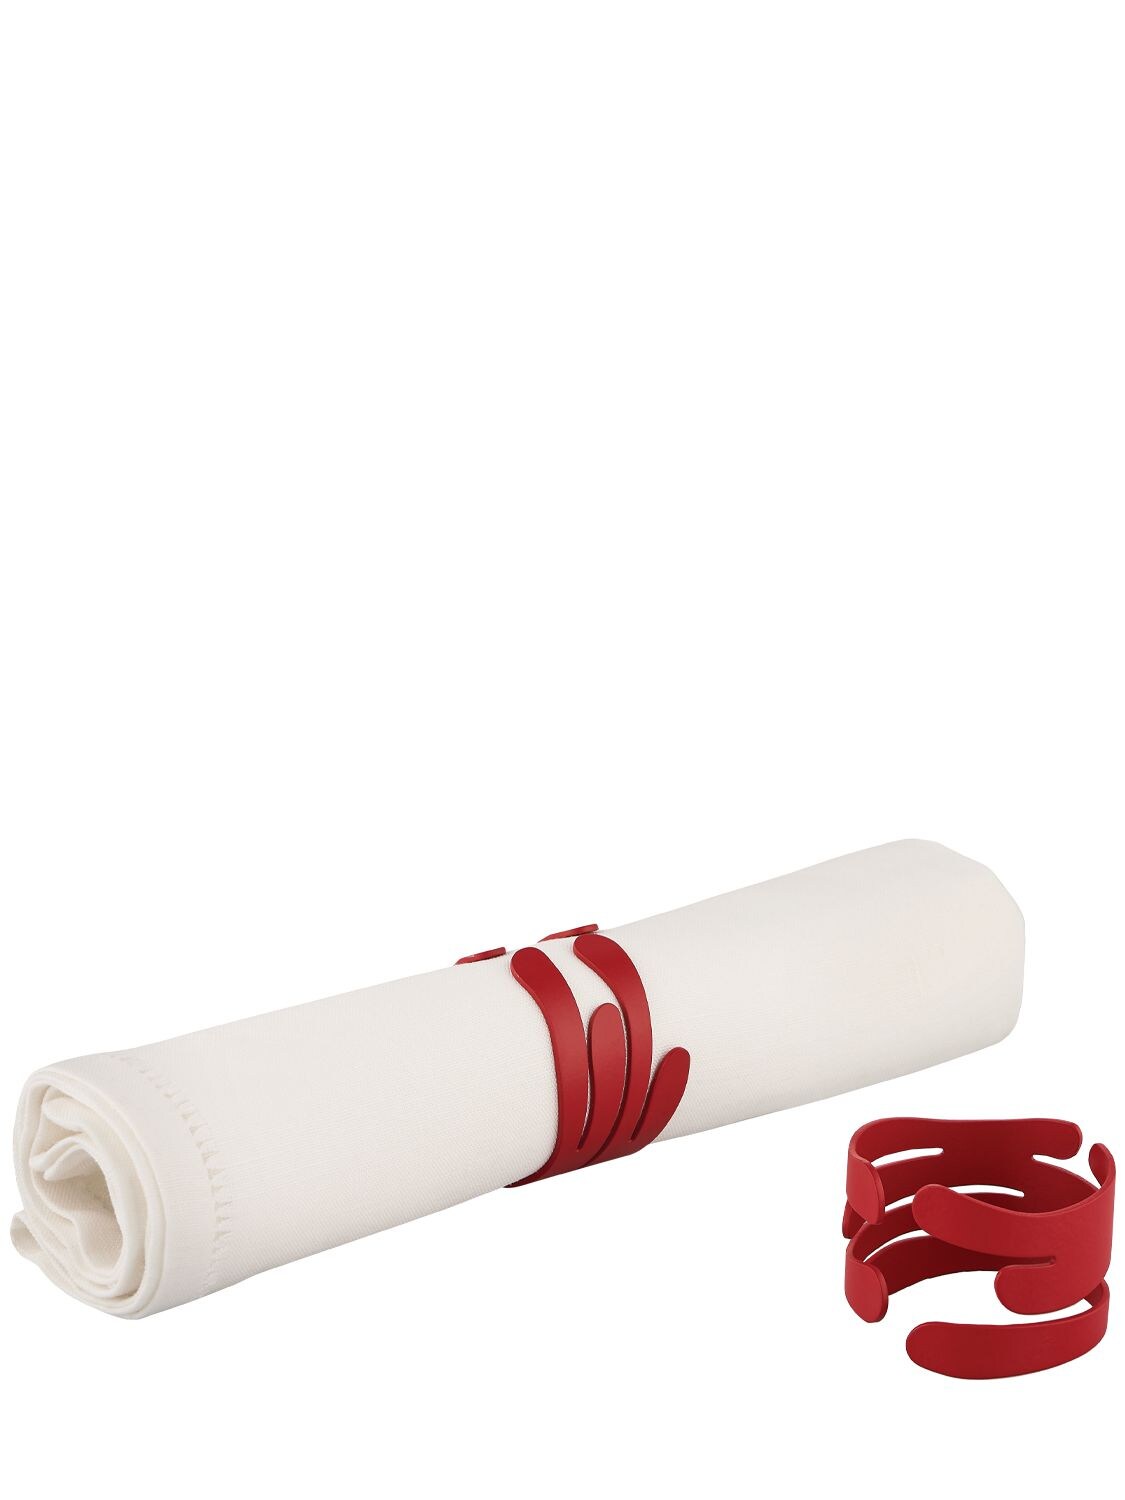 Shop Alessi Set Of 2 Napkin Rings In Red